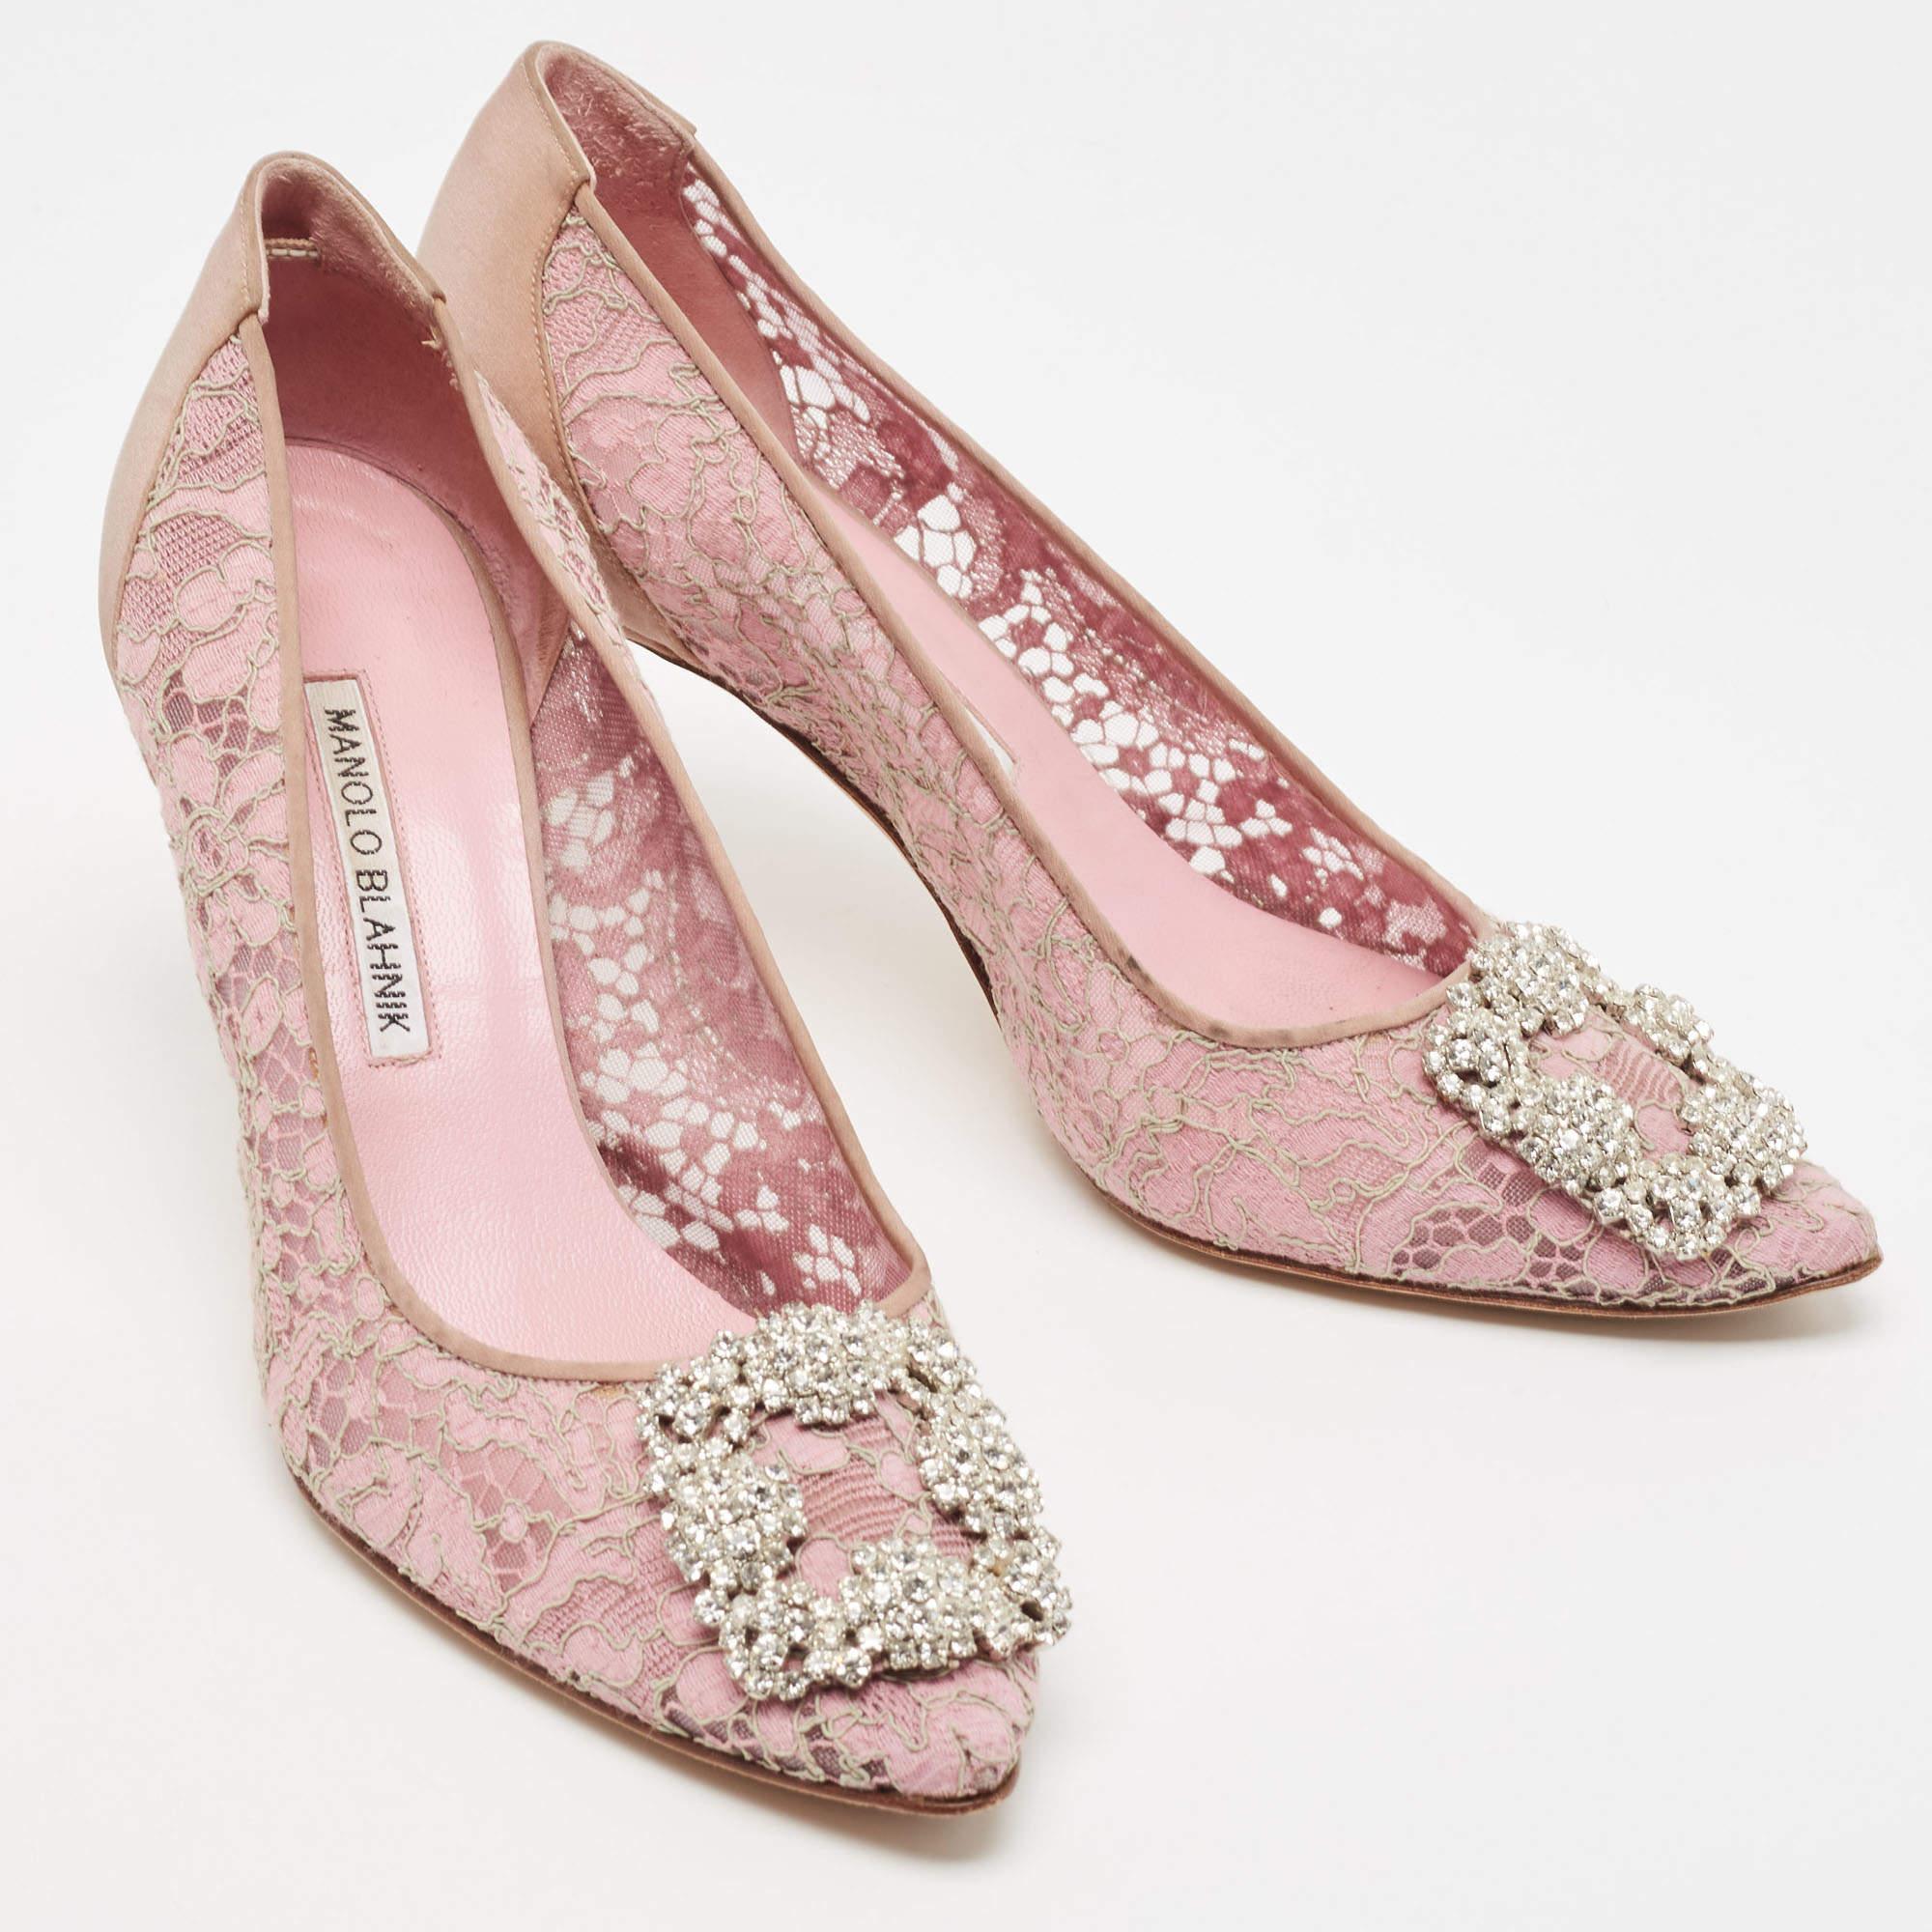 Manolo Blahnik Pink Lace and Mesh Hangisi Pumps Size 38.5 In Good Condition For Sale In Dubai, Al Qouz 2